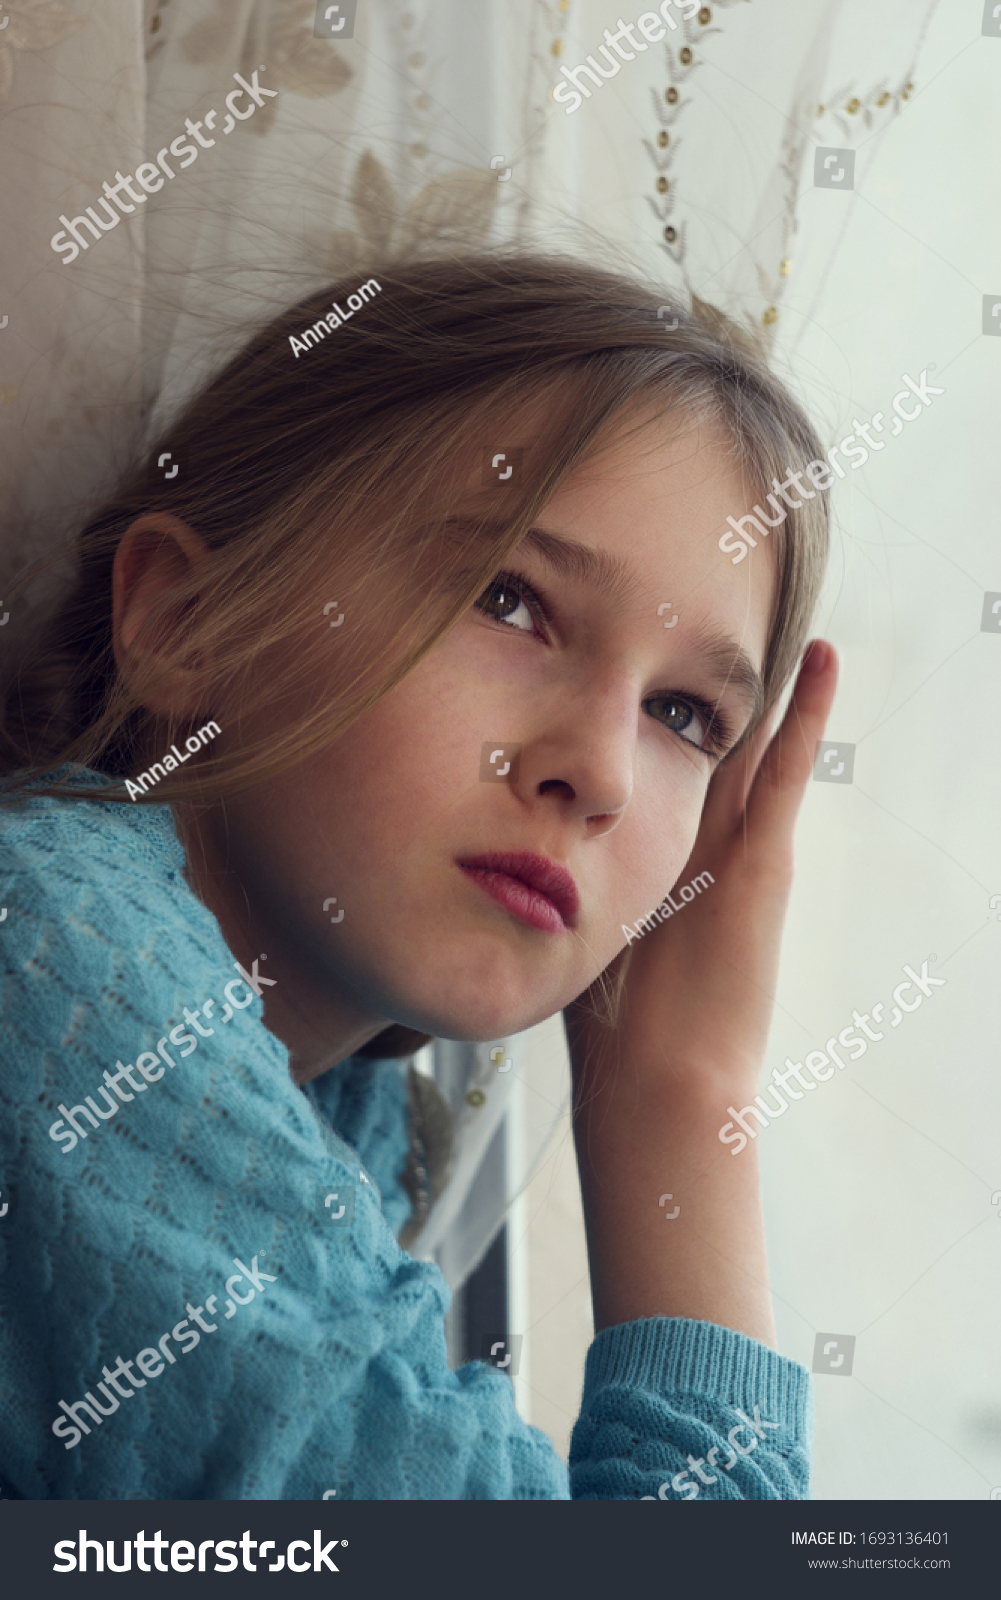 A child looks out of the window with sadness during self-isolation and quarantine. #1693136401